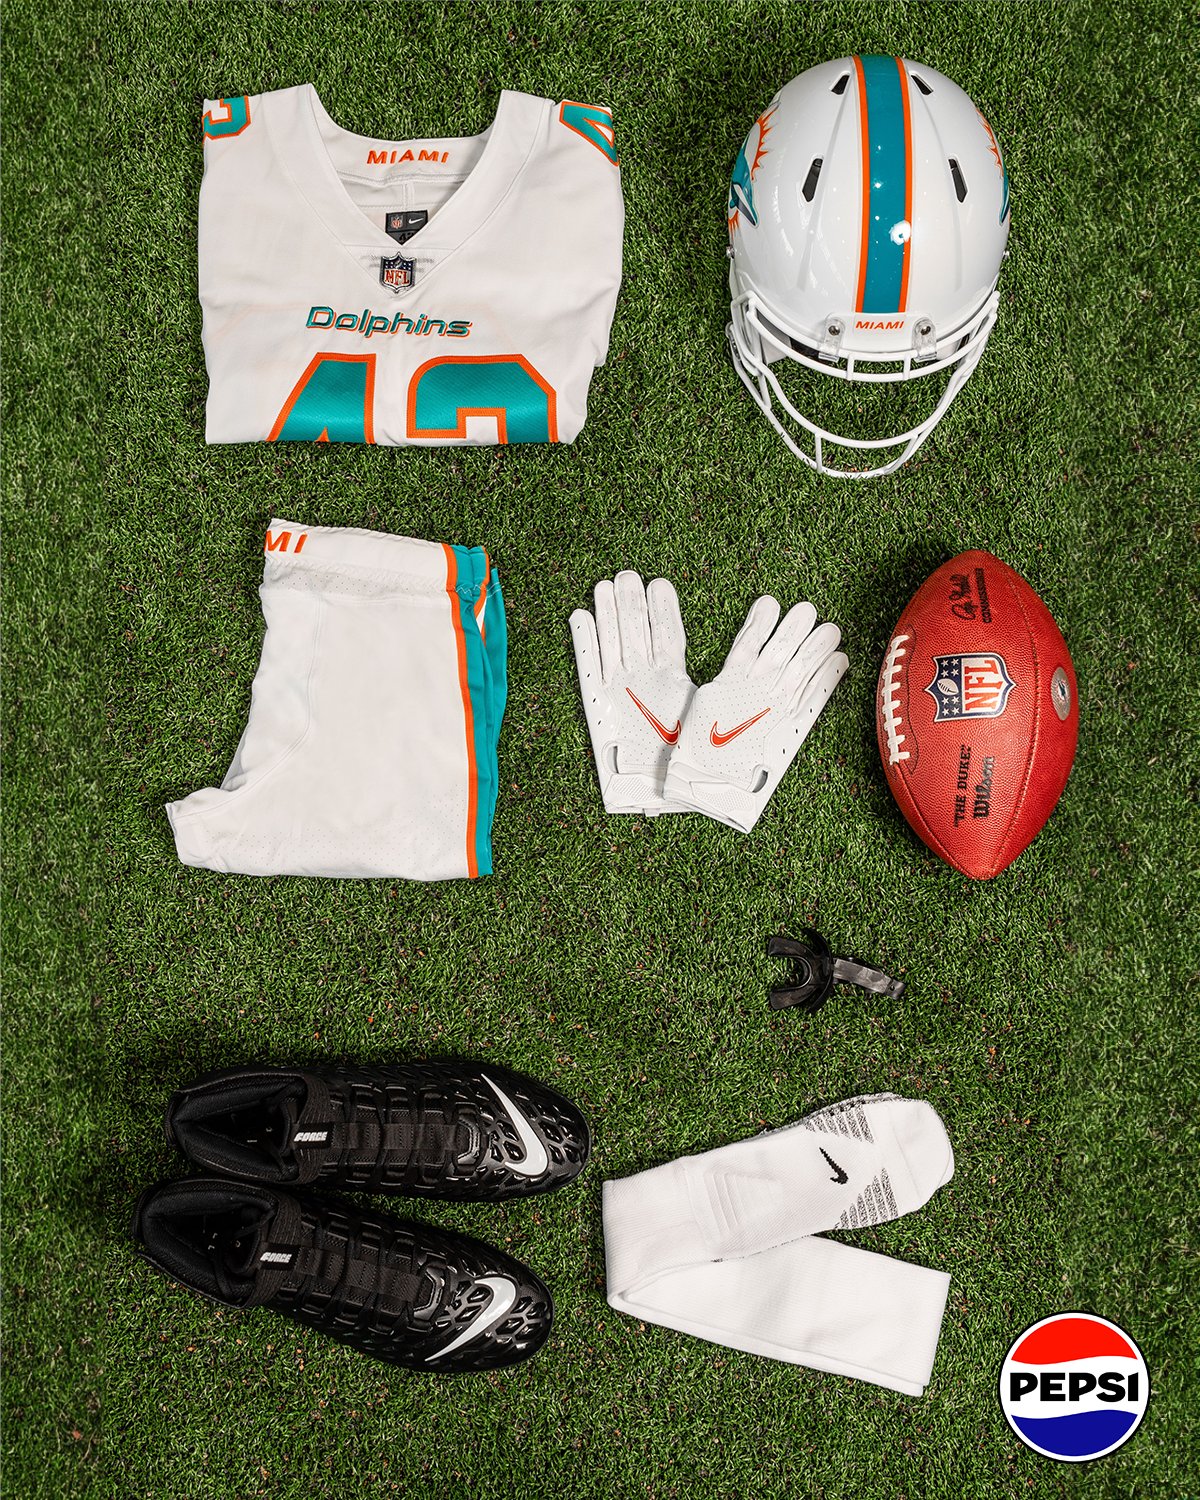 Miami Dolphins on X: Our Sunday best. ⚪️ Wear your white fit to  @HardRockStadium for #DENvsMIA!  / X